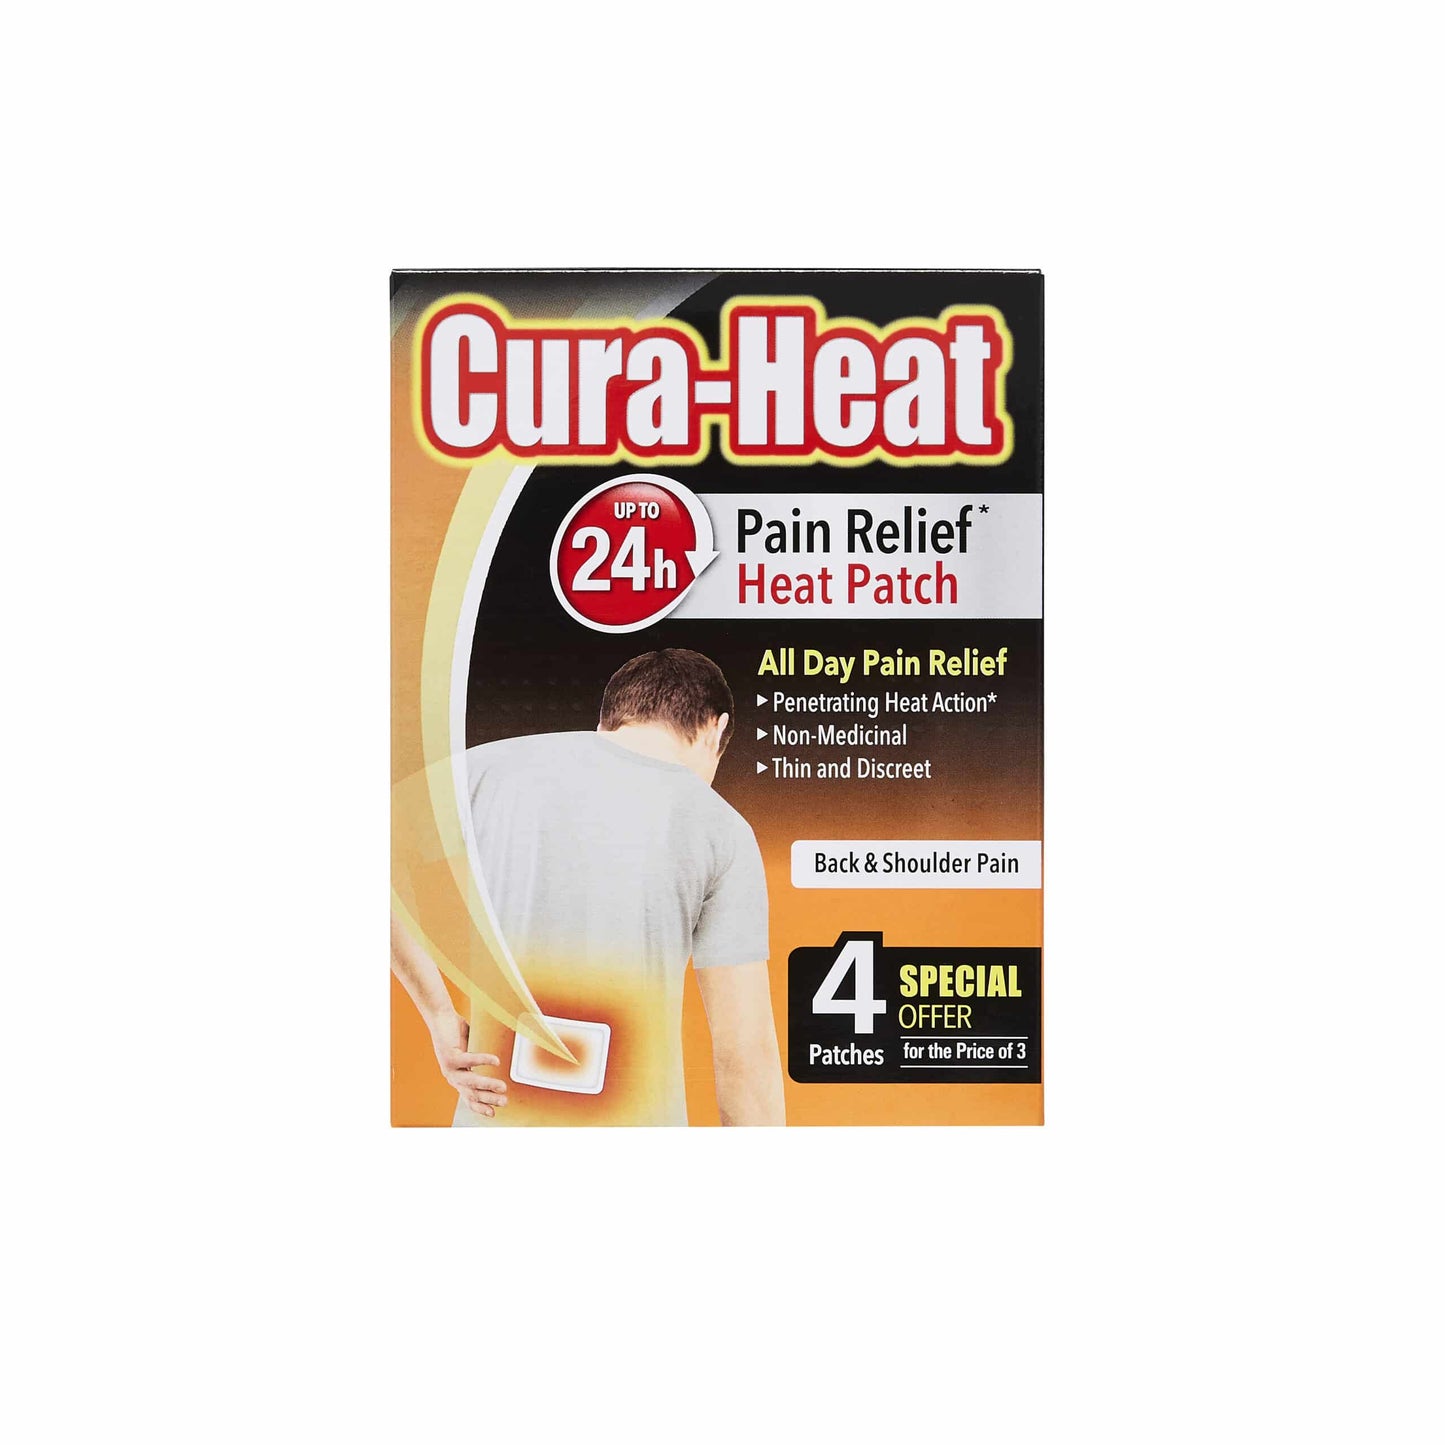 CURA-HEAT PAIN RELIEF HEAT PATCH, PACK OF 3